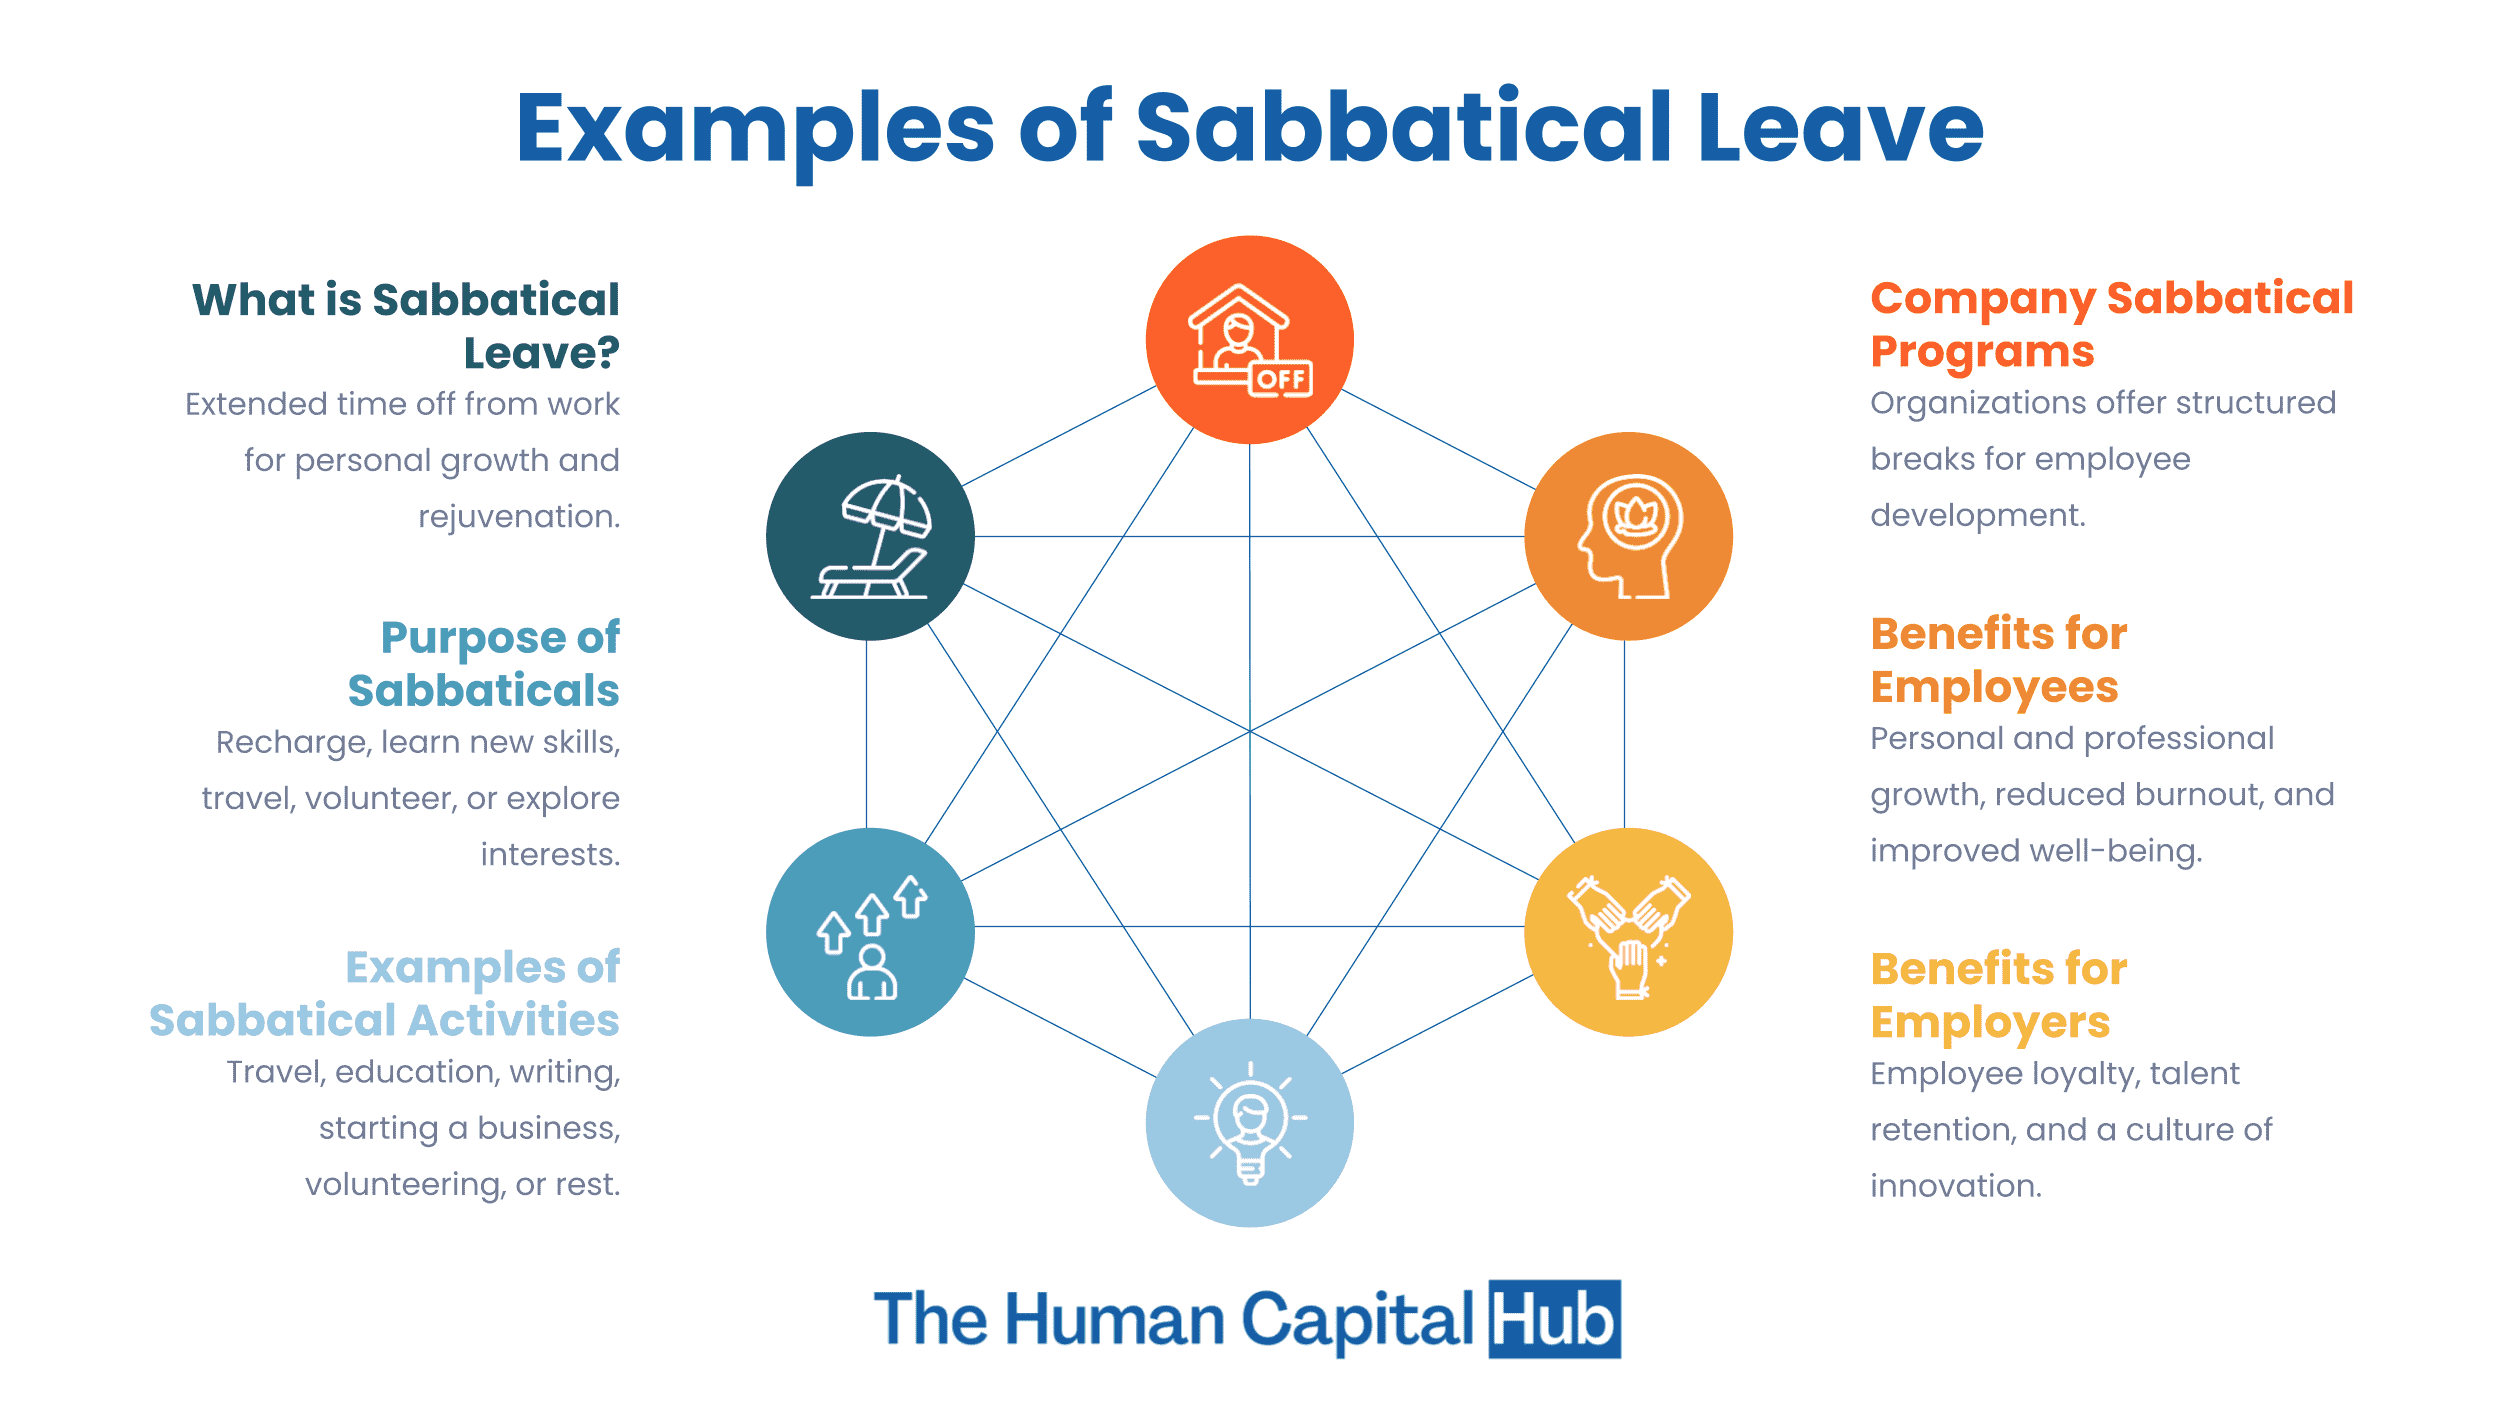 What are Examples of Sabbatical Leave?